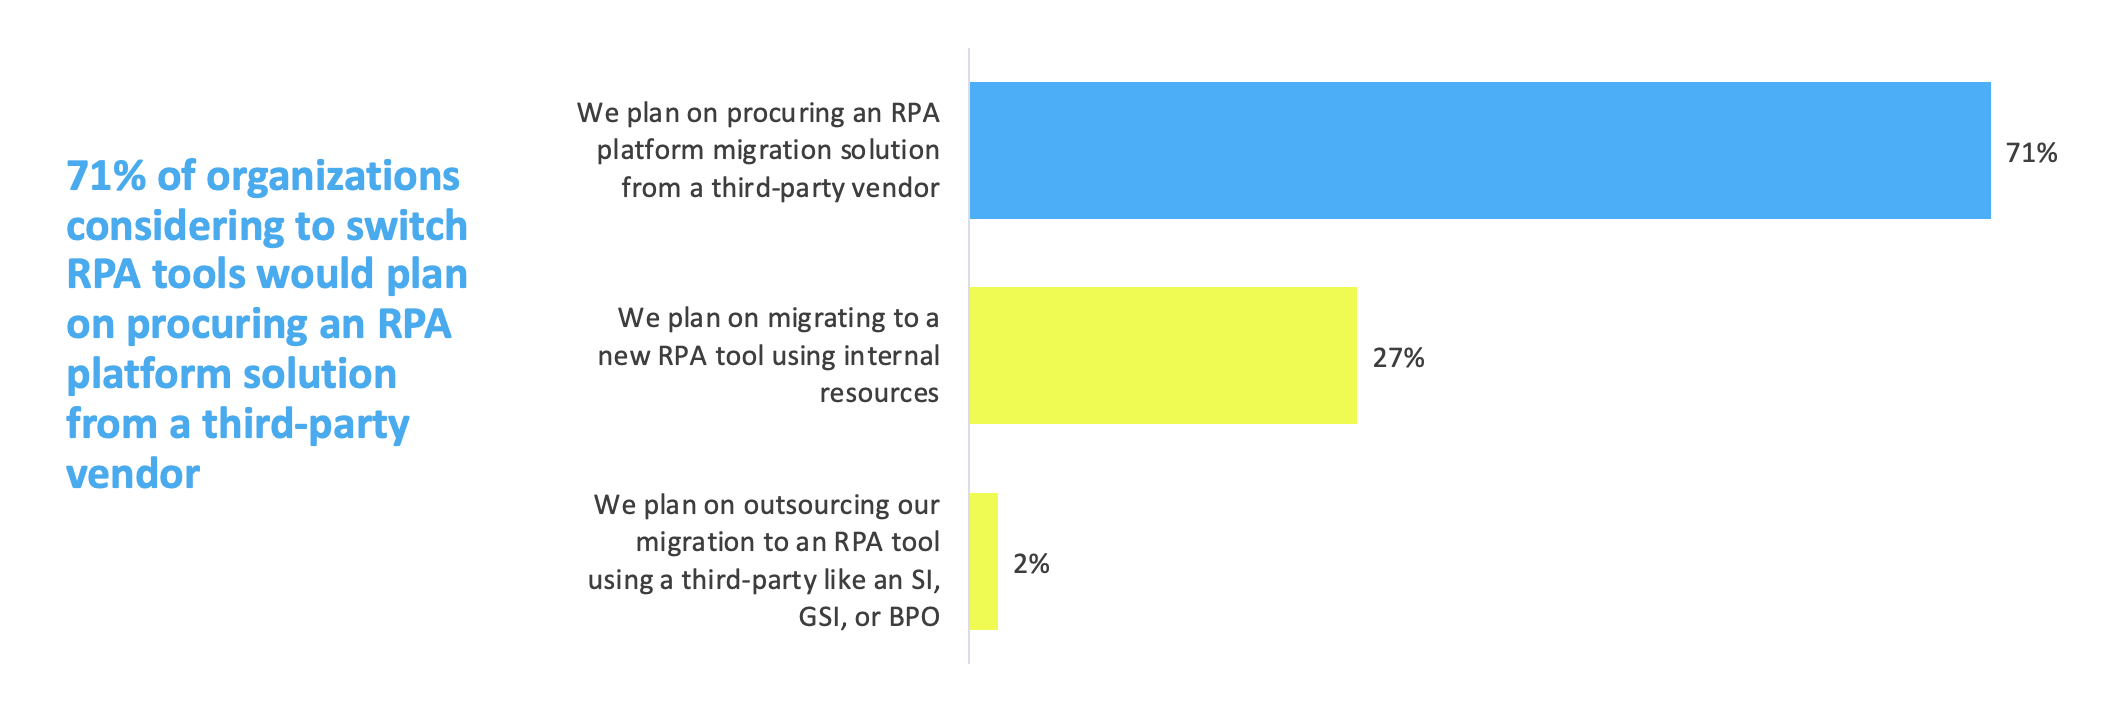 rpa-migration-research-migration-technology